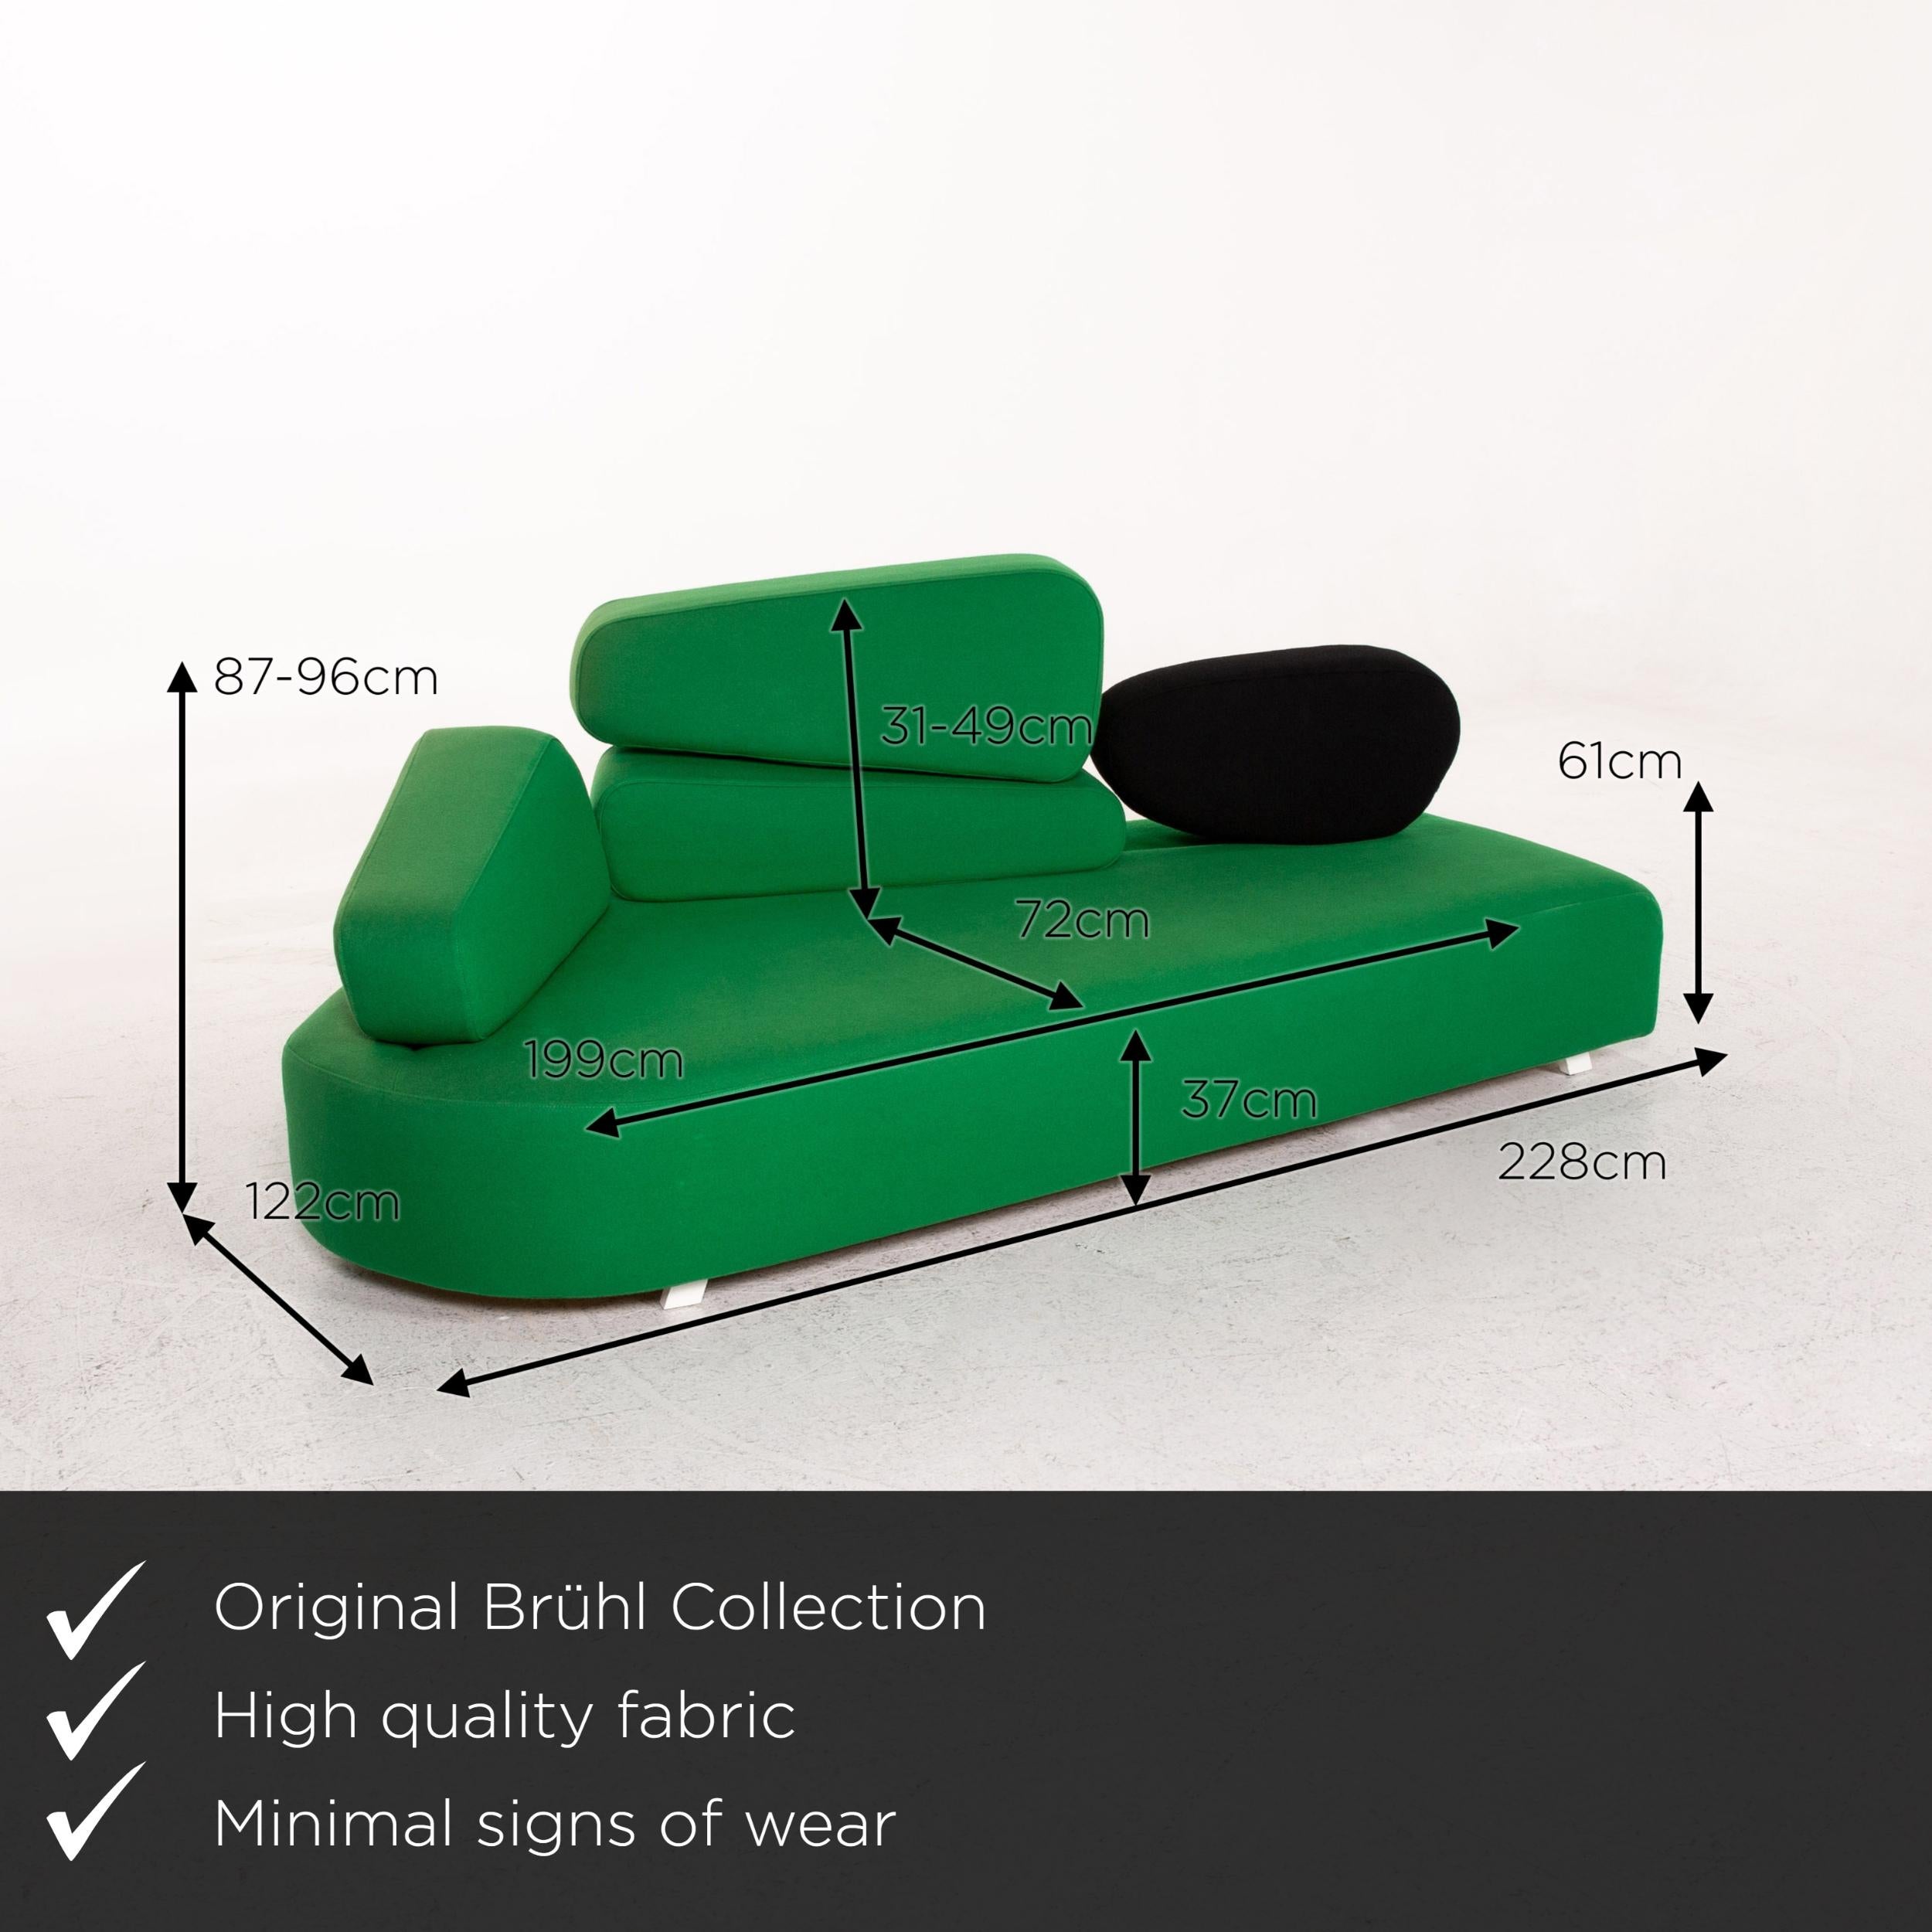 We present to you a Brühl & Sippold Mosspink fabric sofa green three-seat couch.


 Product measurements in centimeters:
 

Depth 122
Width 228
Height 96
Seat height 37
Rest height 61
Seat depth 72
Seat width 199
Back height 31.
 